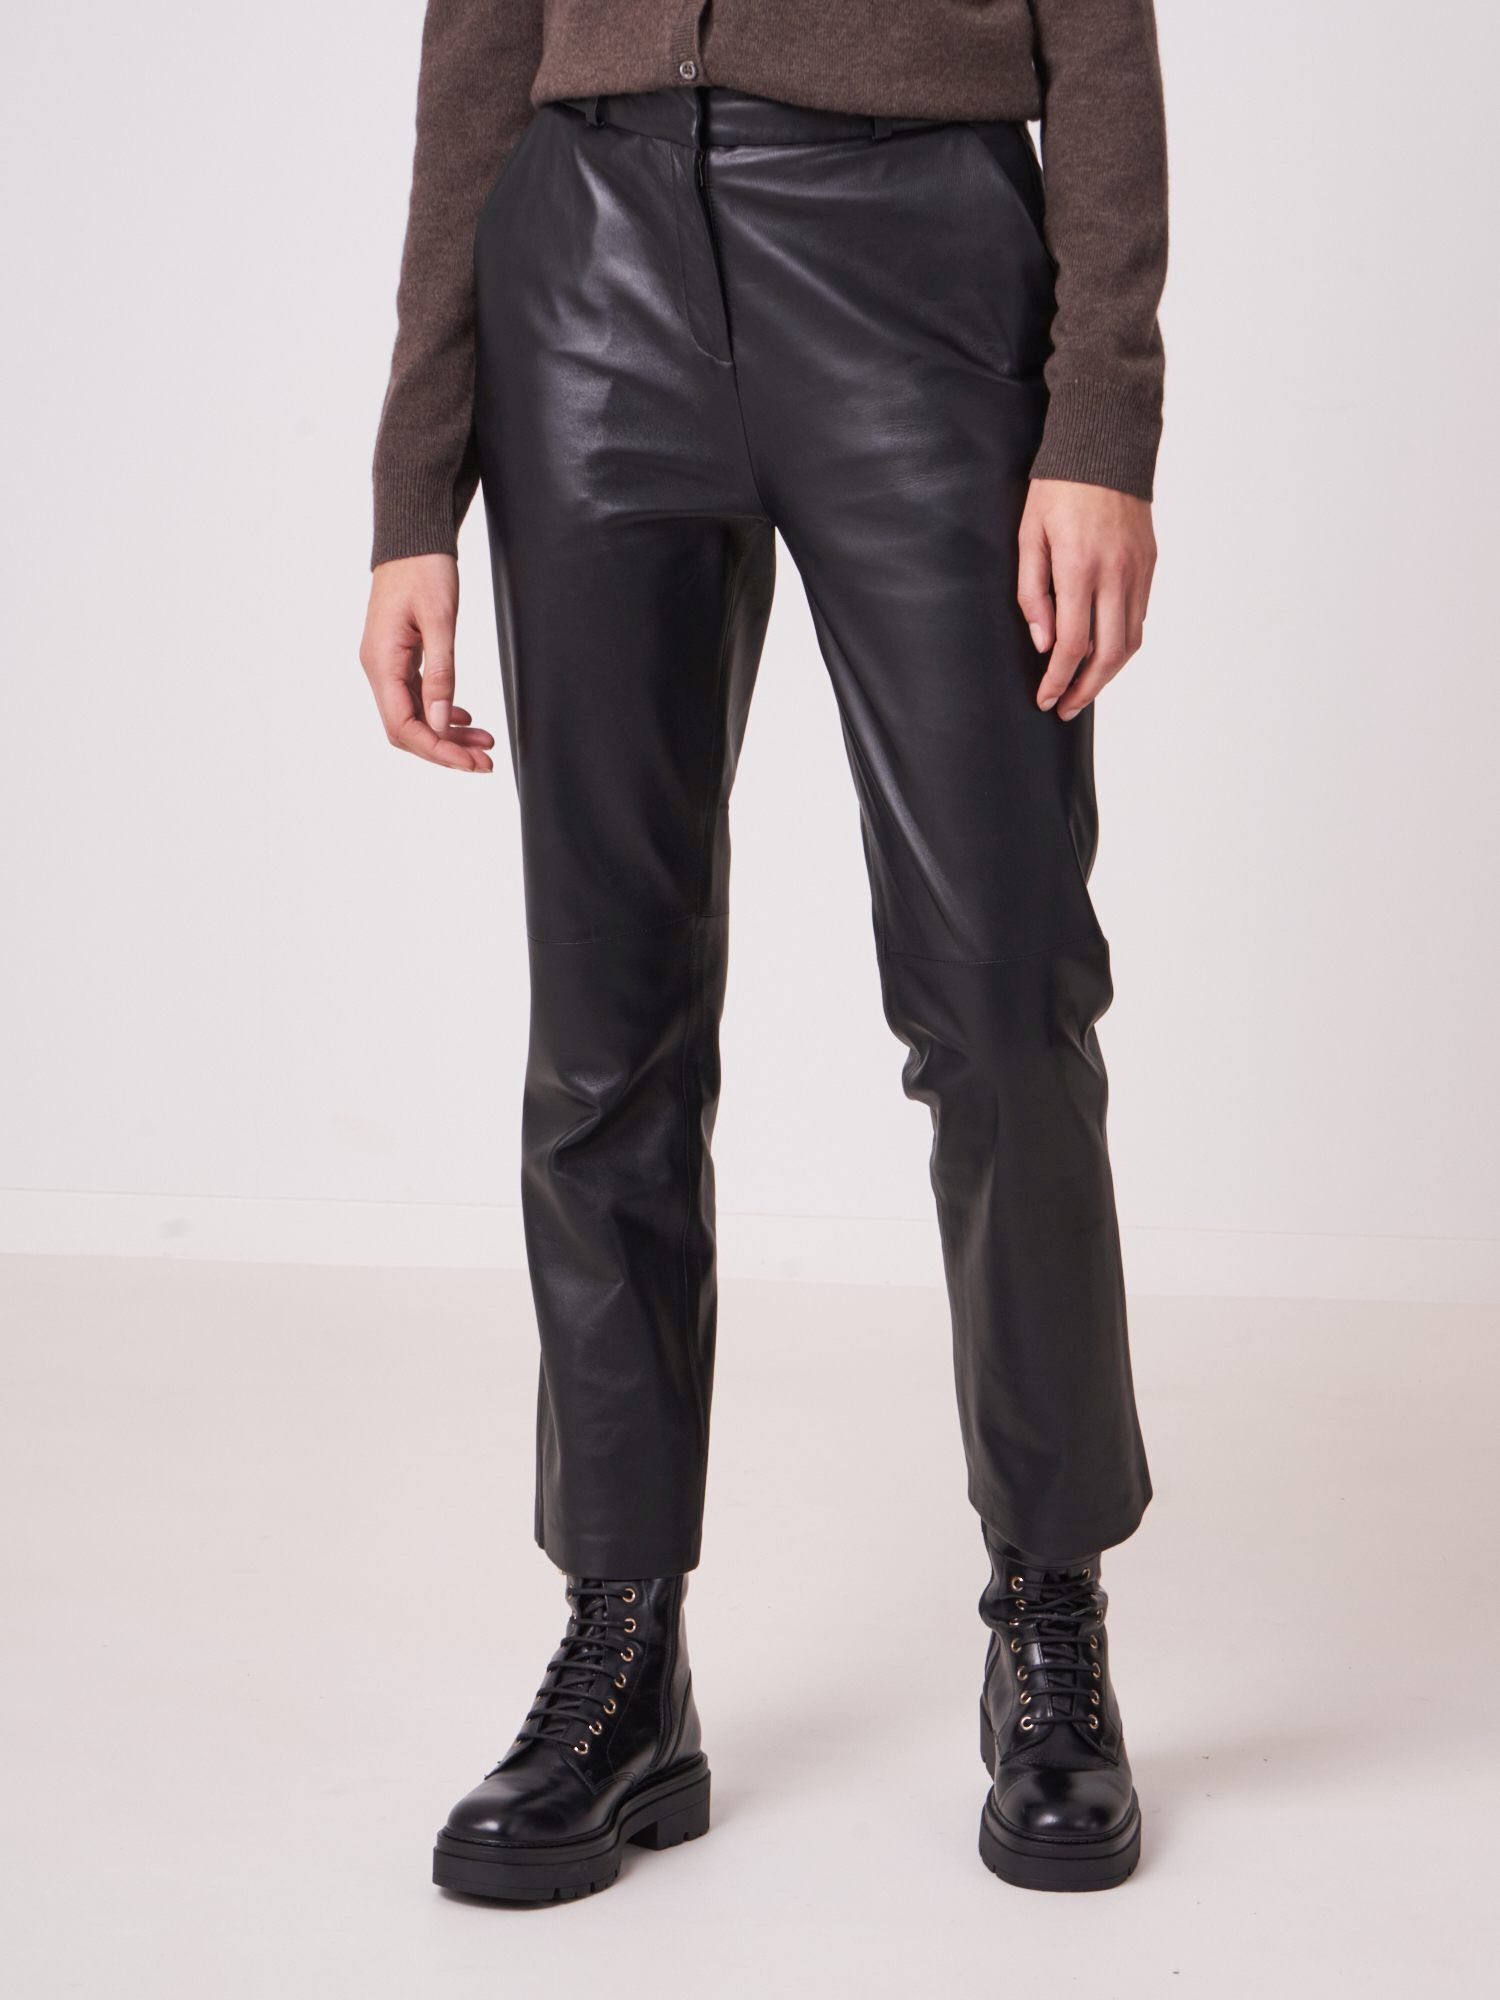 Leather Pants Women - Buy Leather Pants Women online at Best Prices in  India | Flipkart.com